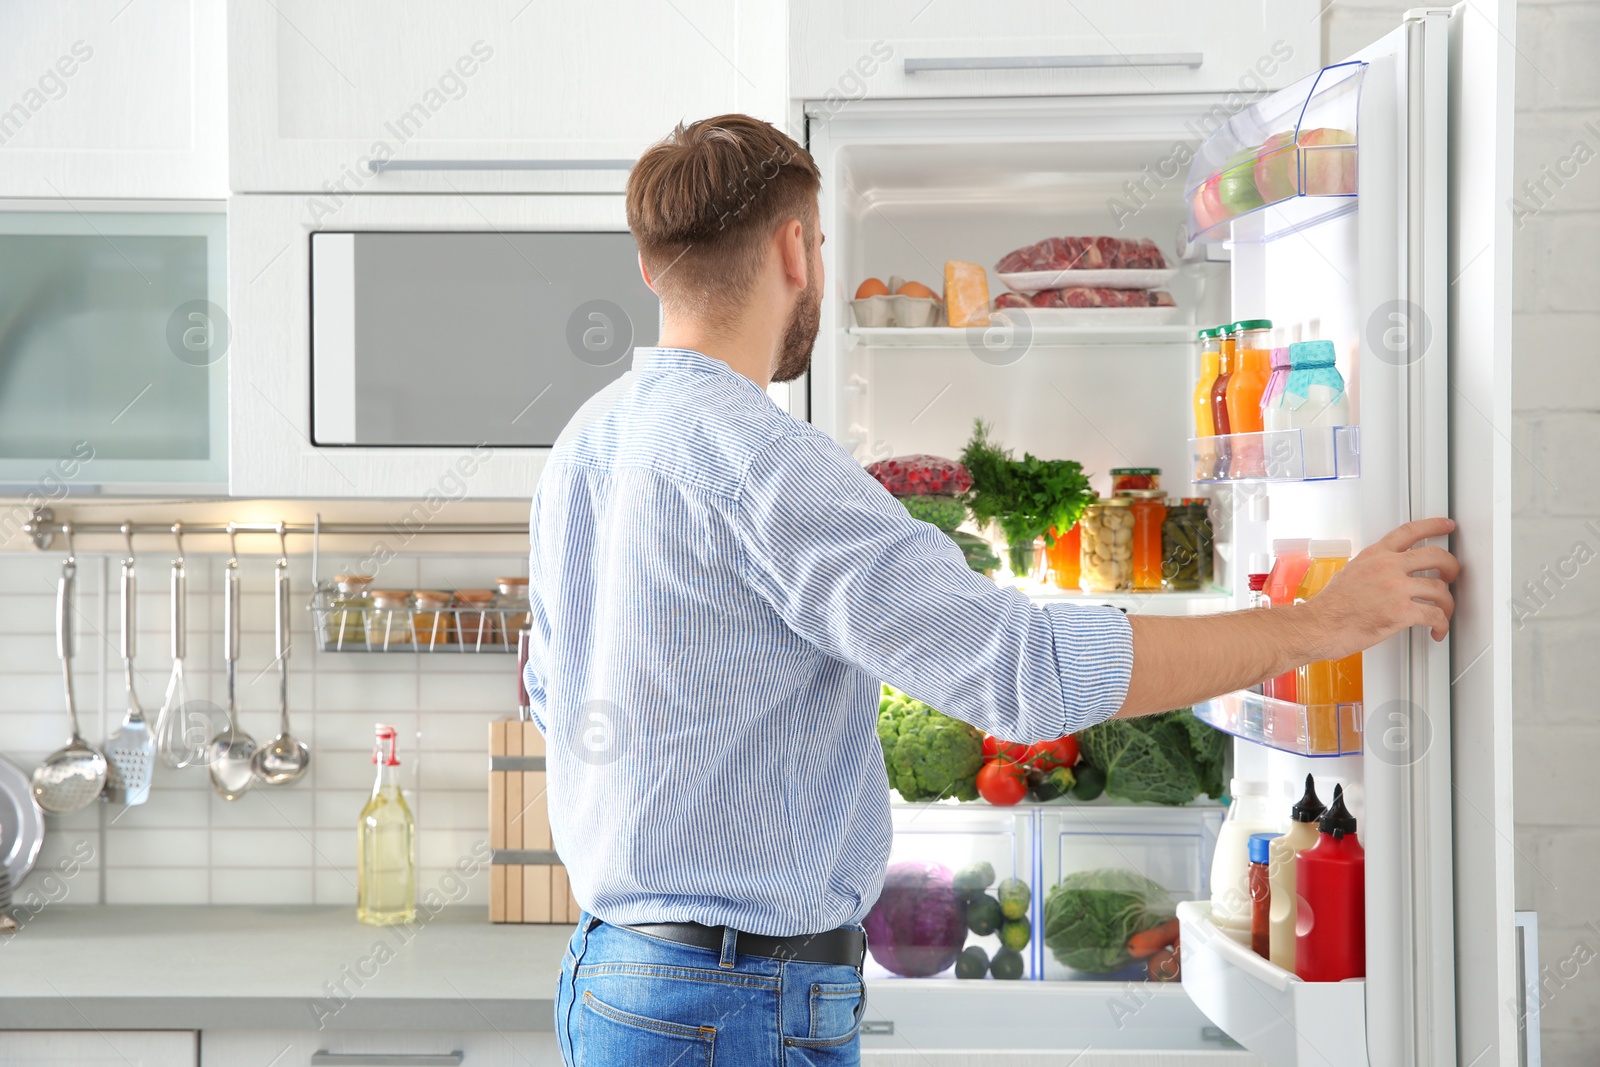 Photo of Man choosing food from refrigerator in kitchen